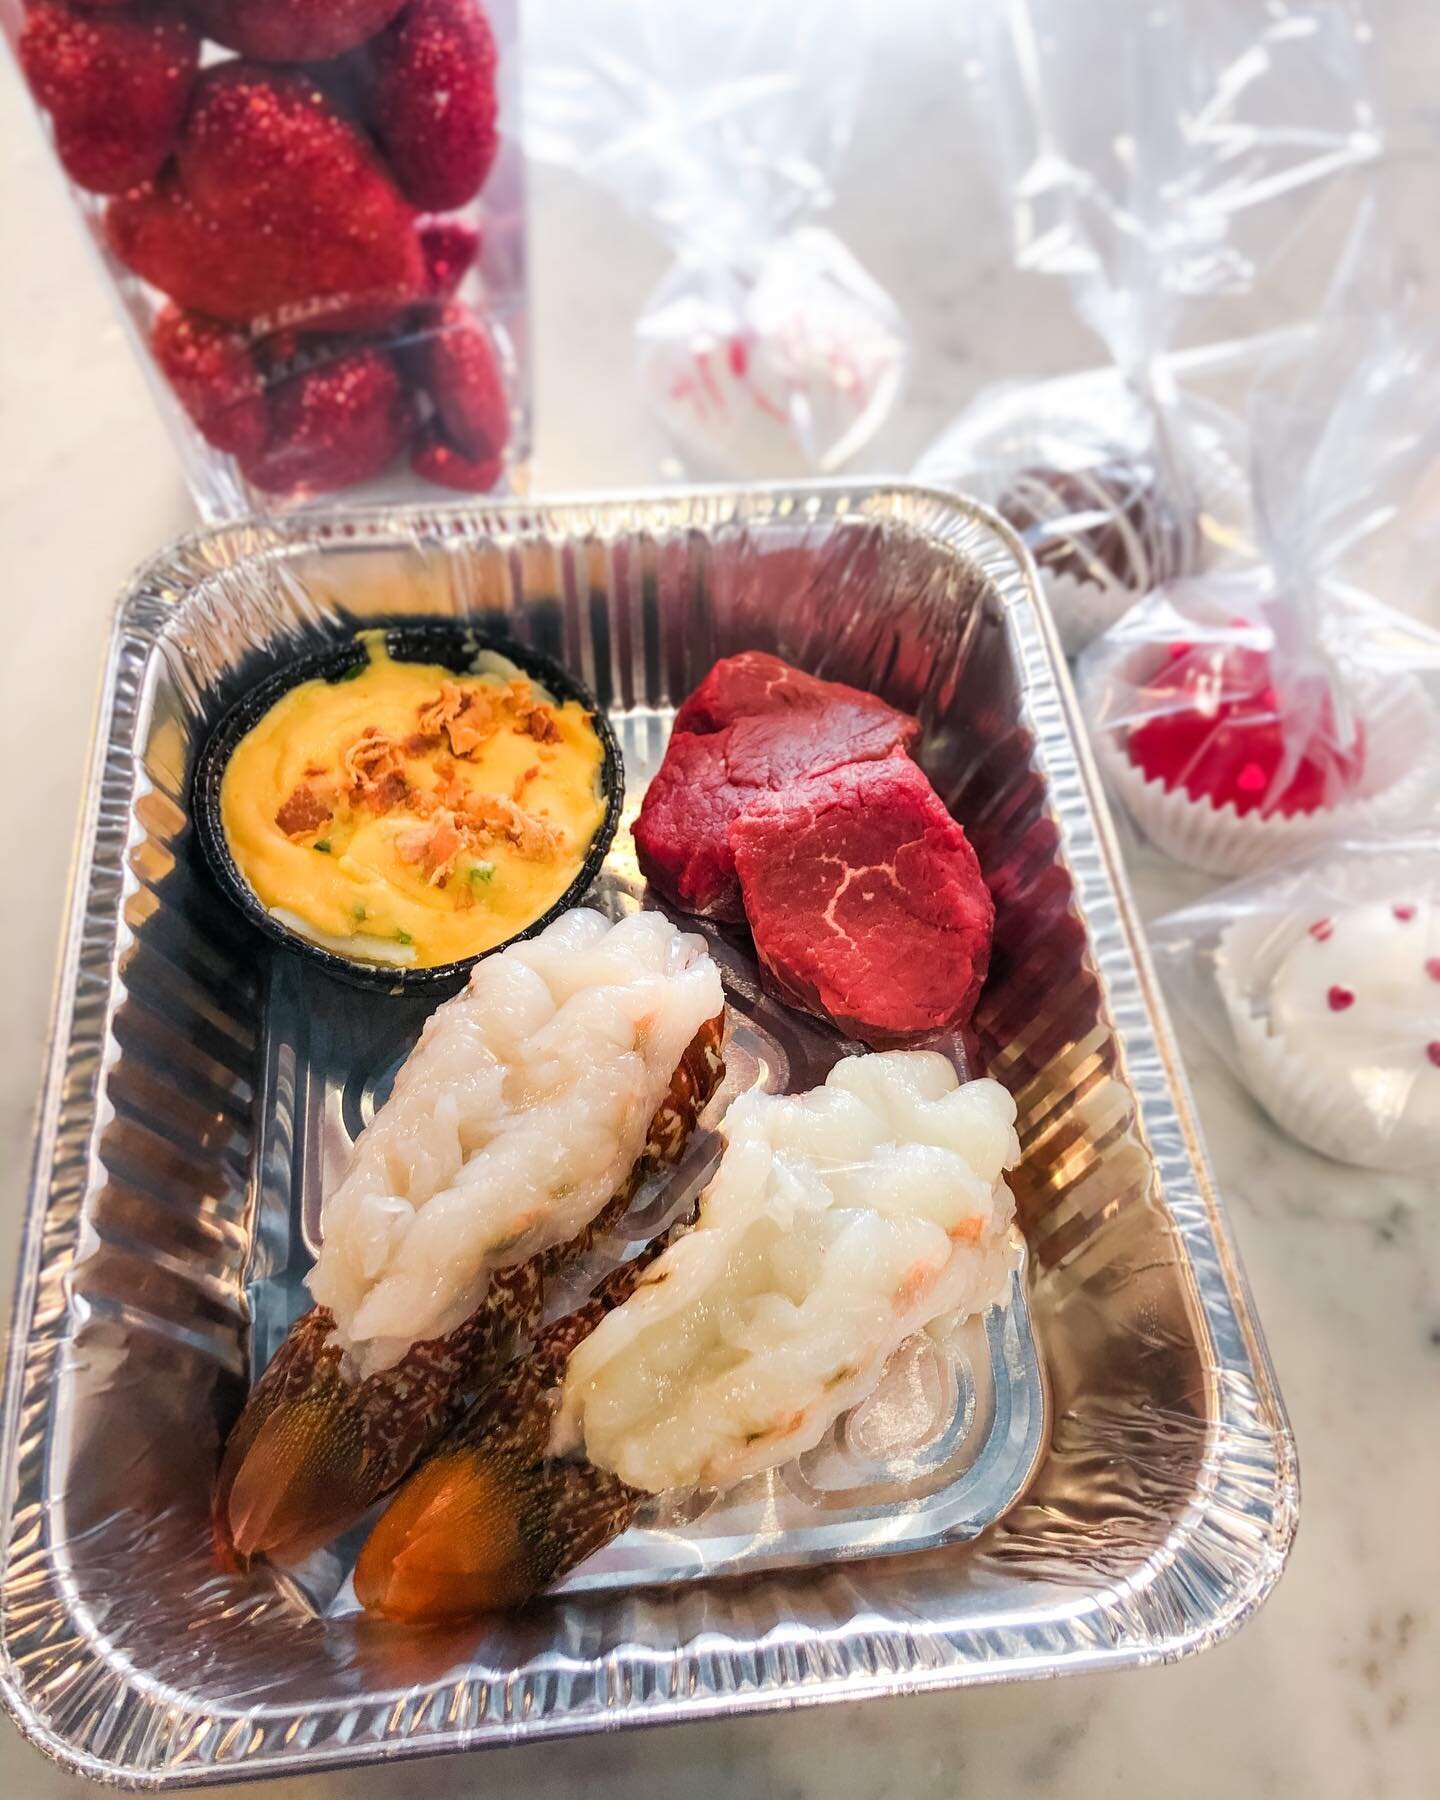 Jonah&rsquo;s Meal Kits are back! Order a Valentine&rsquo;s Day Meal Kit to celebrate your sweetheart ❤️

Order by Friday at 4pm for Saturday or Sunday pickup! 

Swipe to see the details 👉🏼